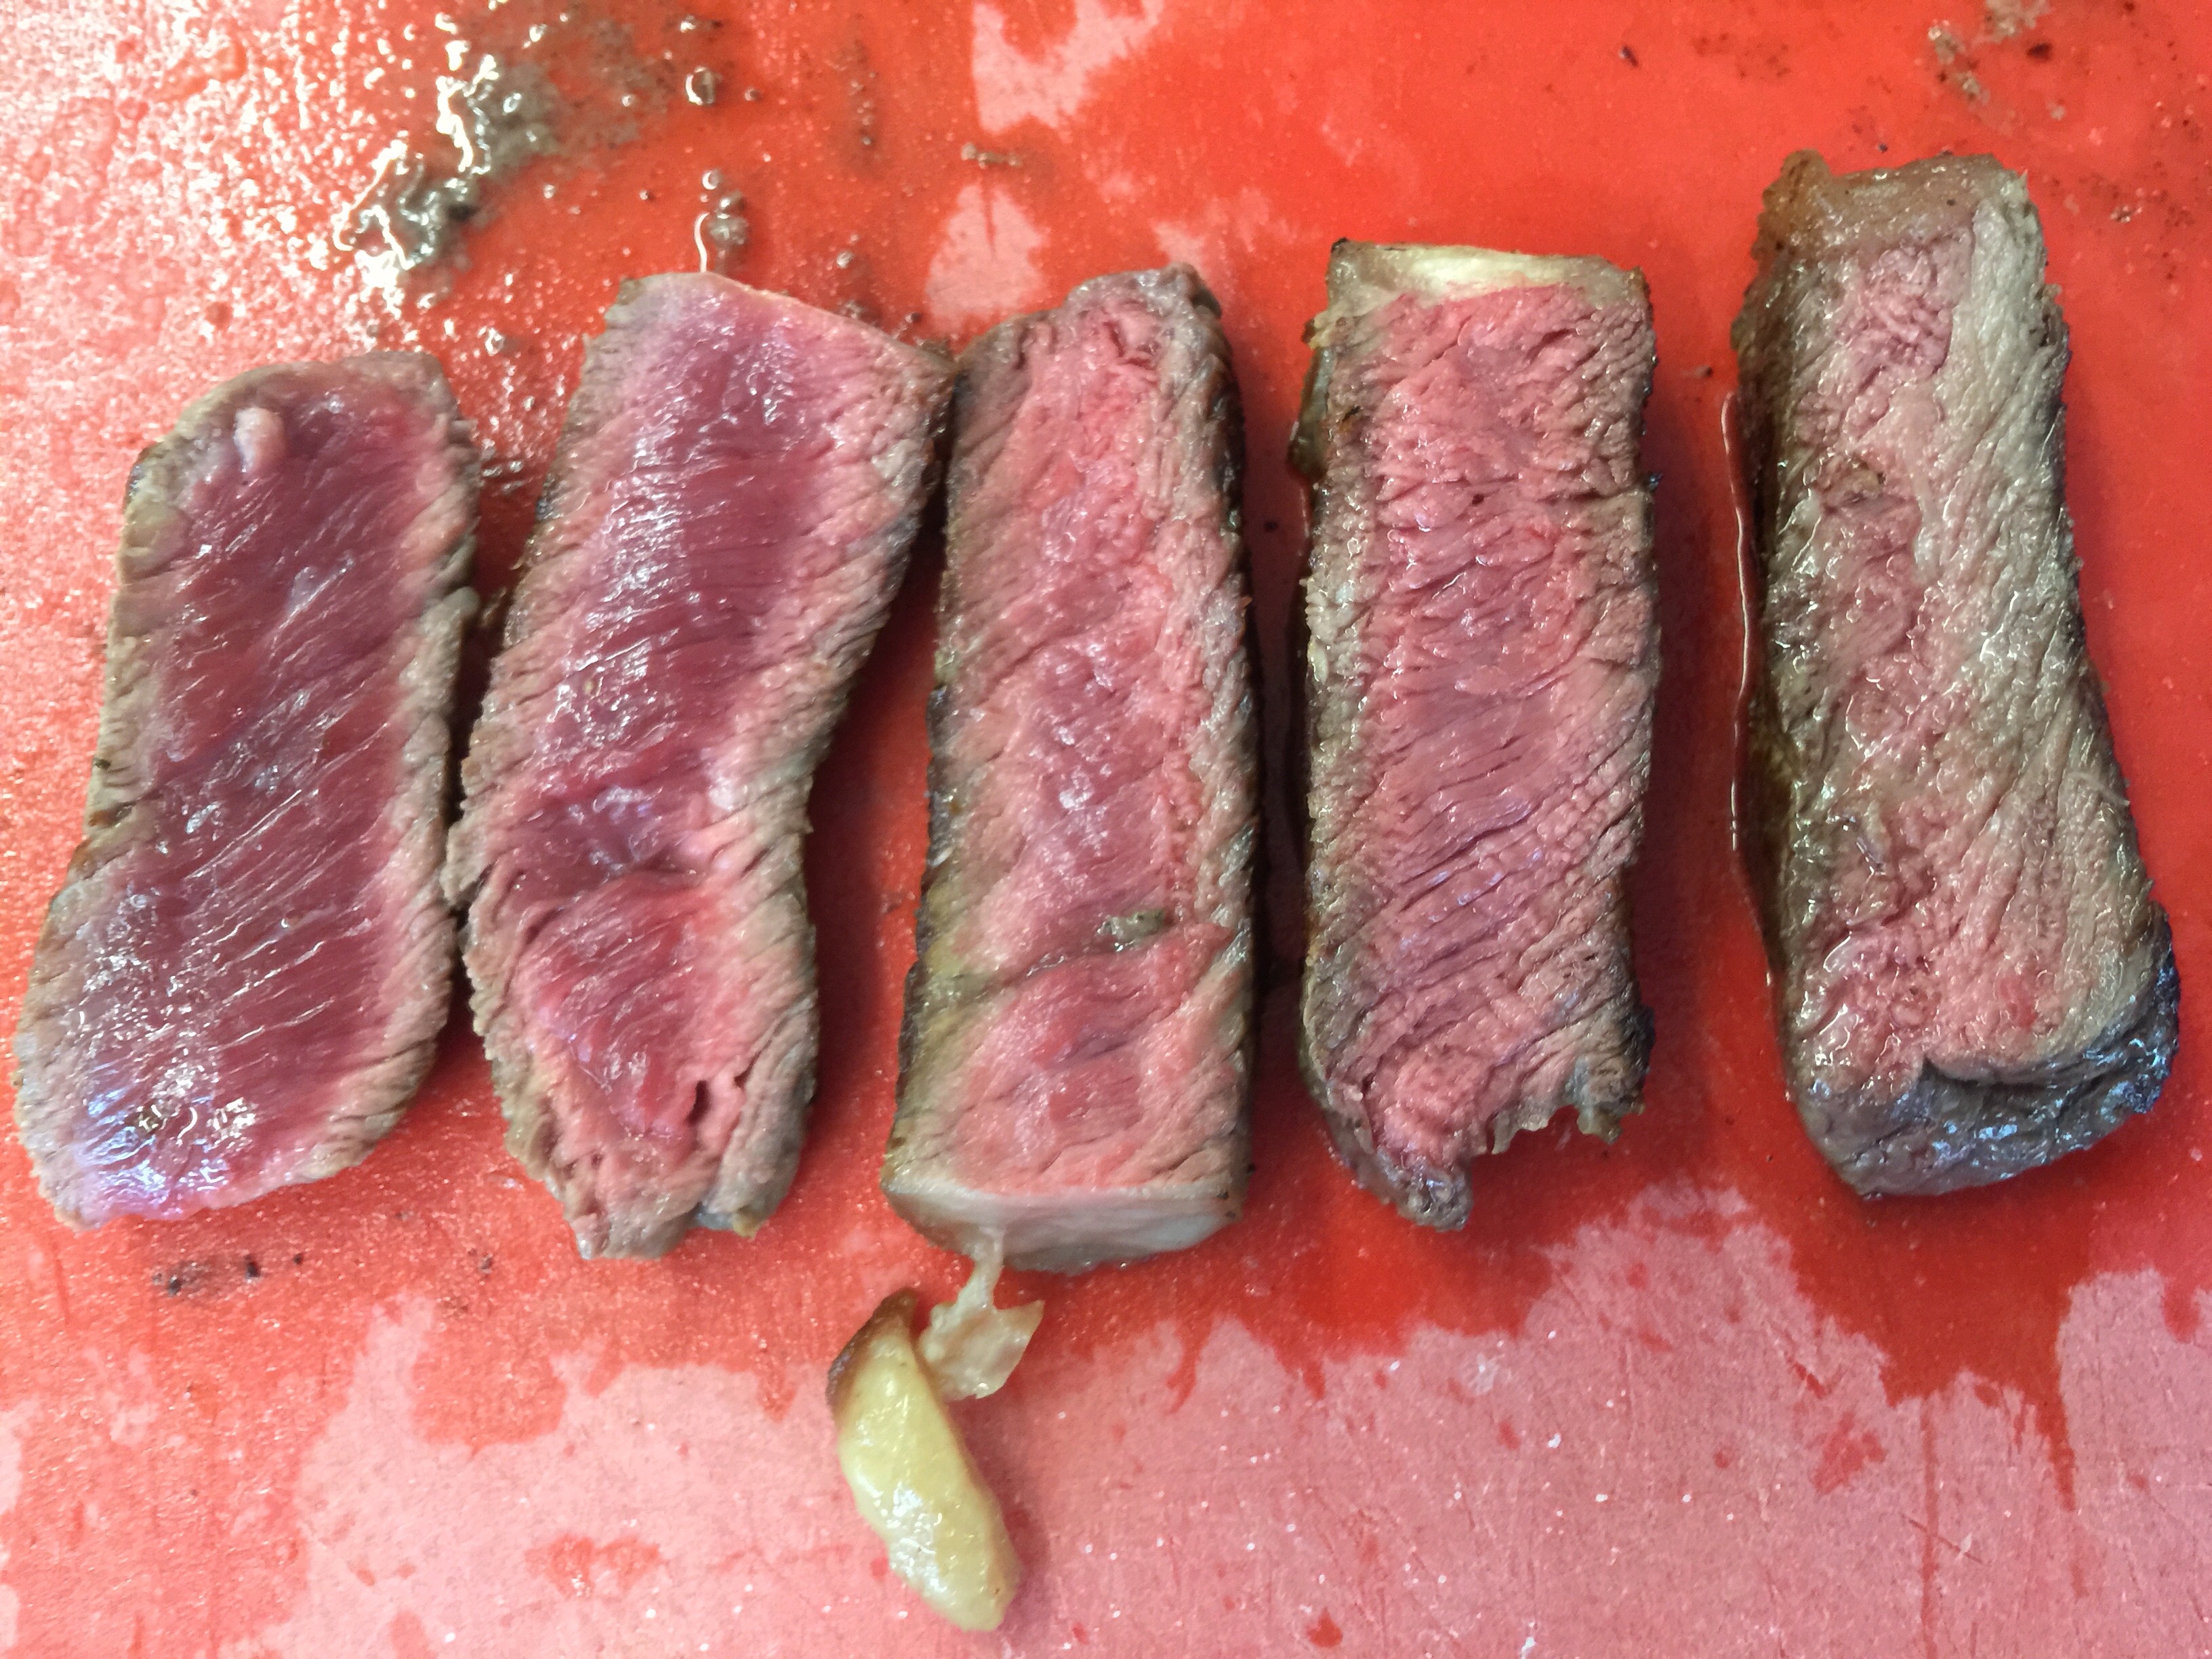 Various stages of cooked steak